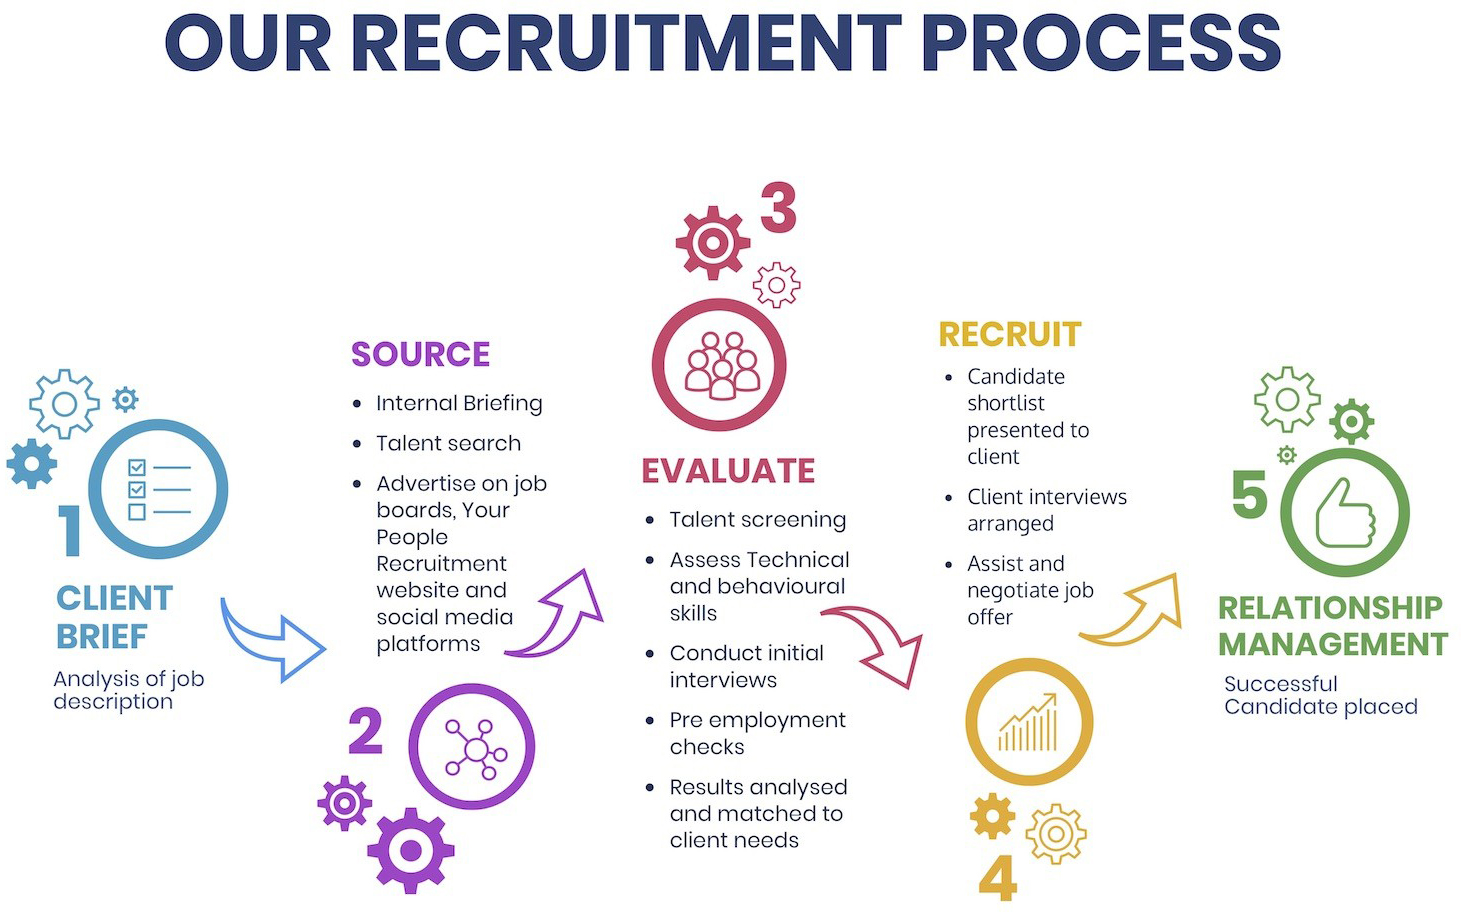 Our recruitment process